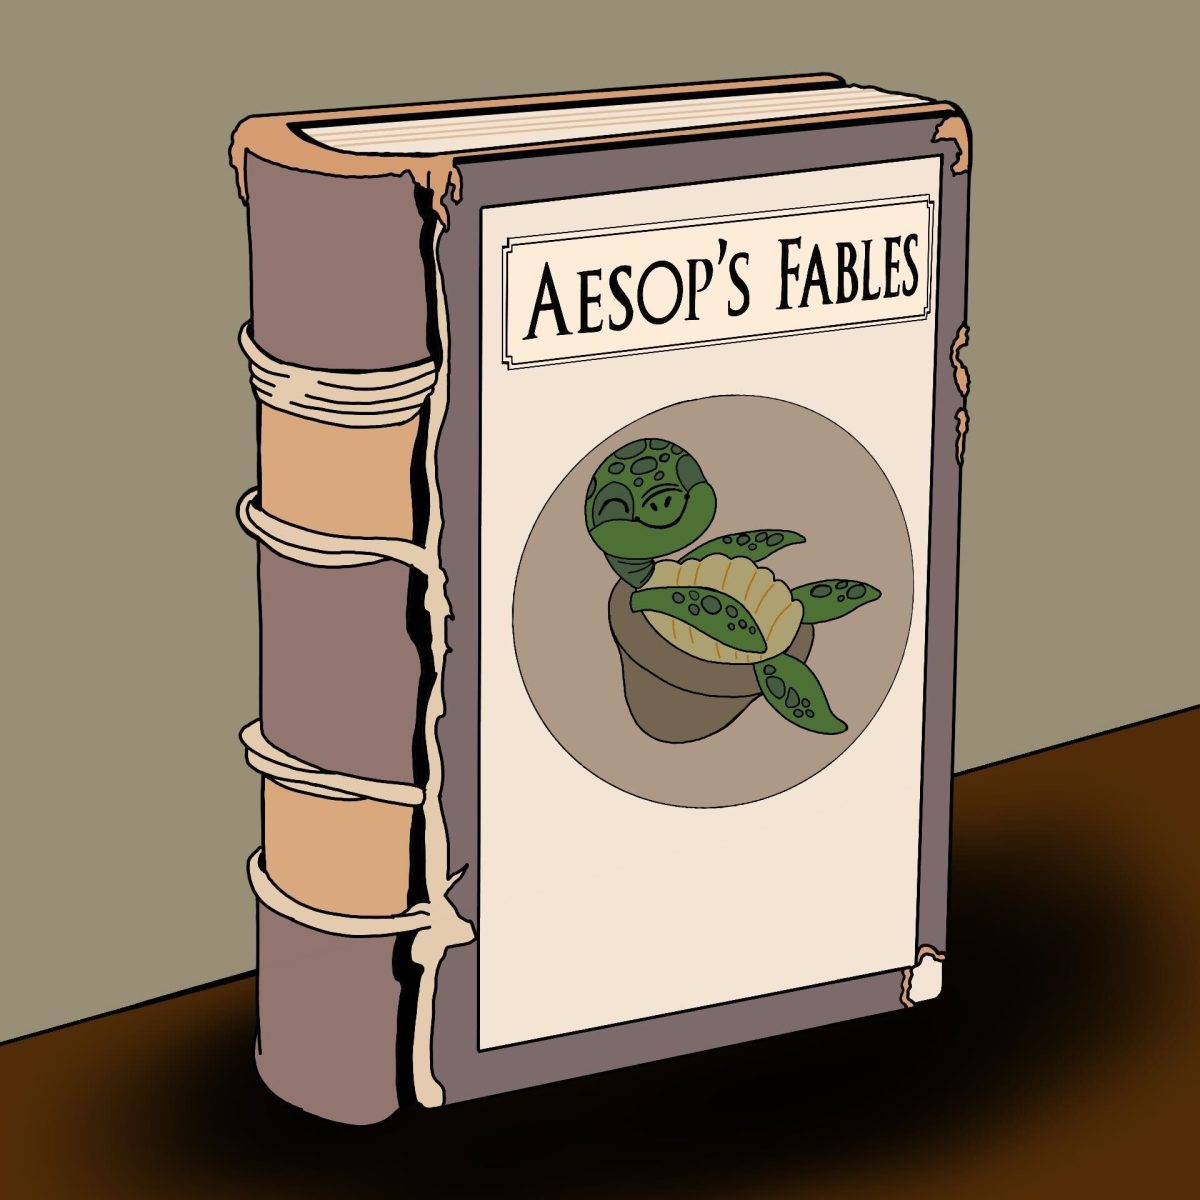 Fables are an accessible source of timeless lessons for all ages